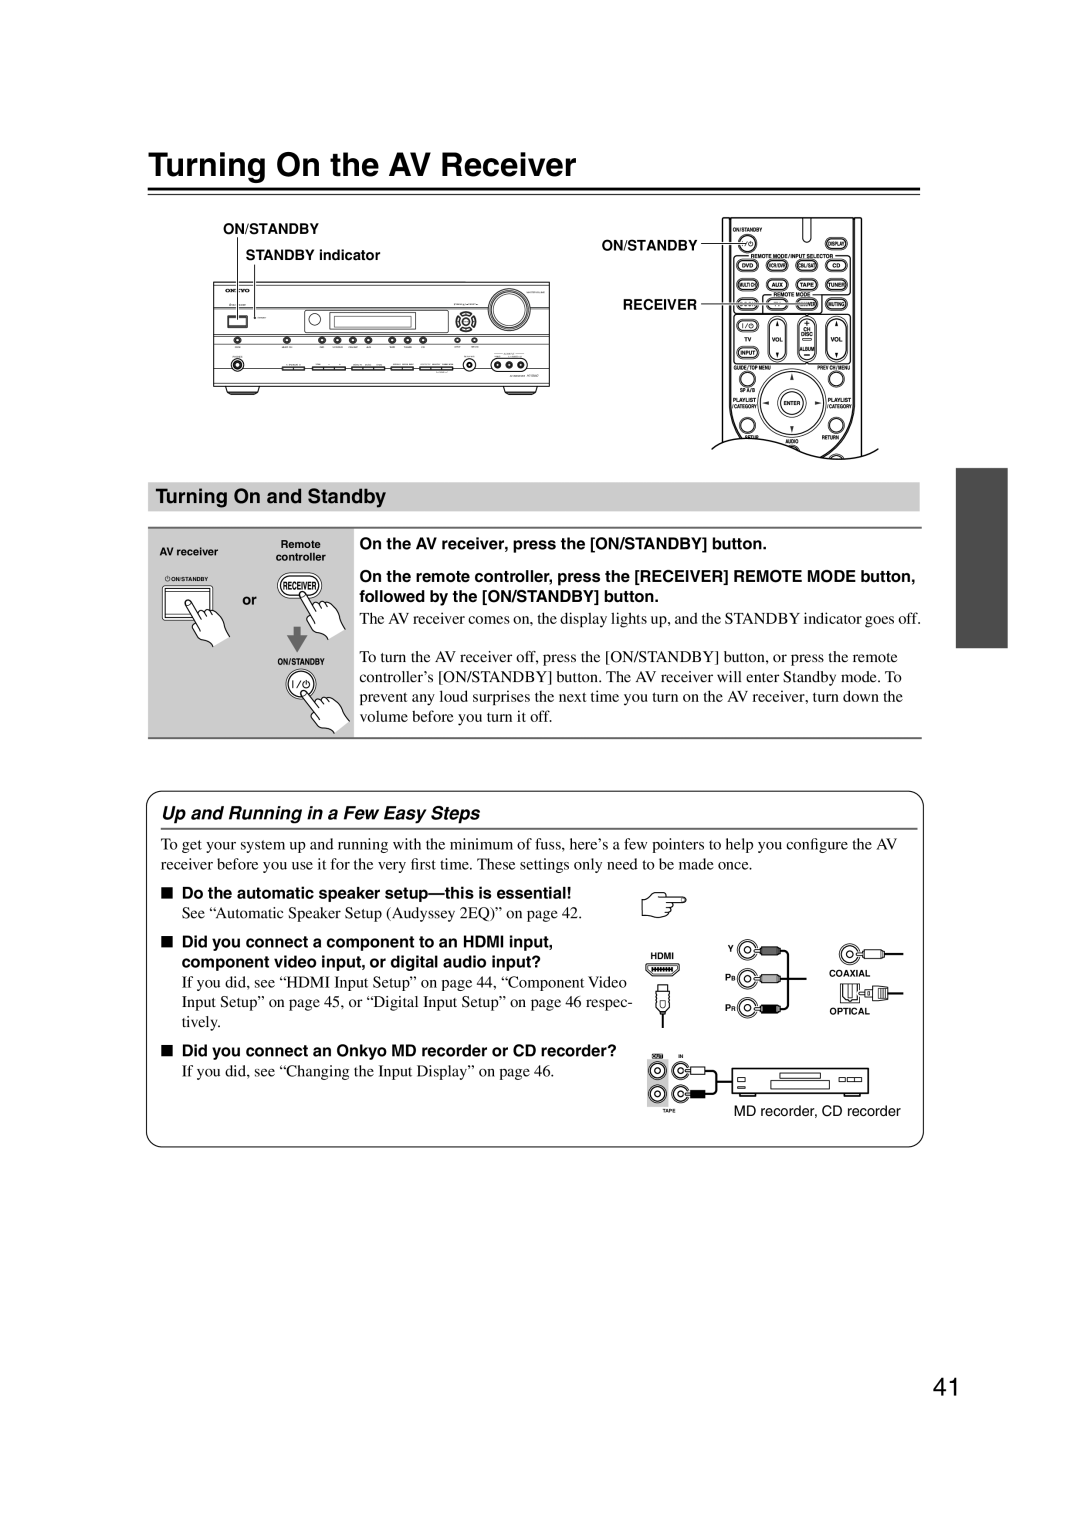 Onkyo HT-S5100 instruction manual Turning On the AV Receiver, Turning On and Standby, Up and Running in a Few Easy Steps 